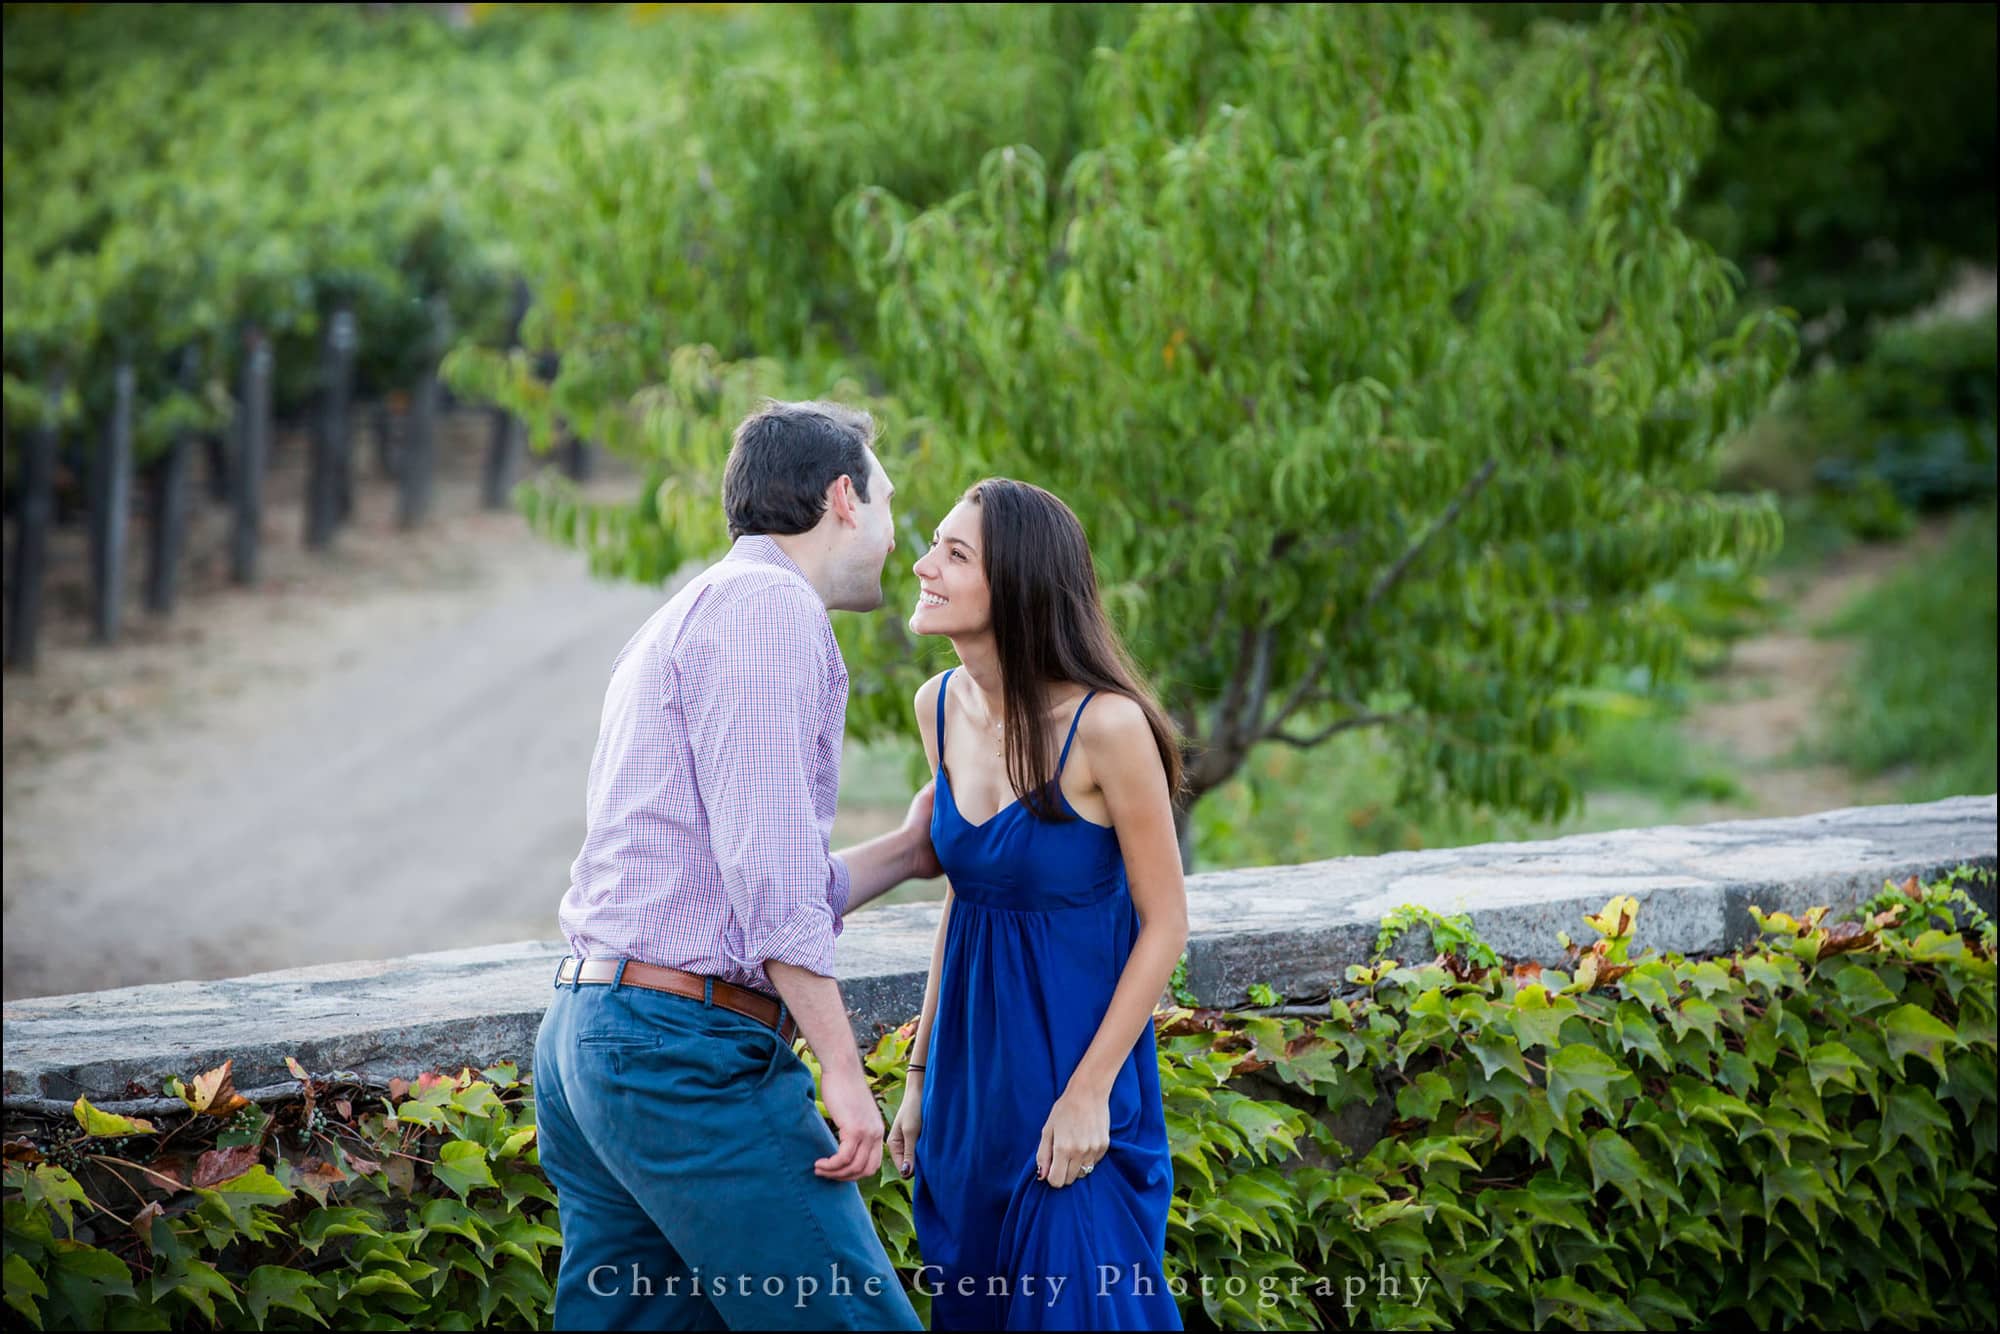 Marriage Proposal Photography in the Napa Valley Amizetta Winery